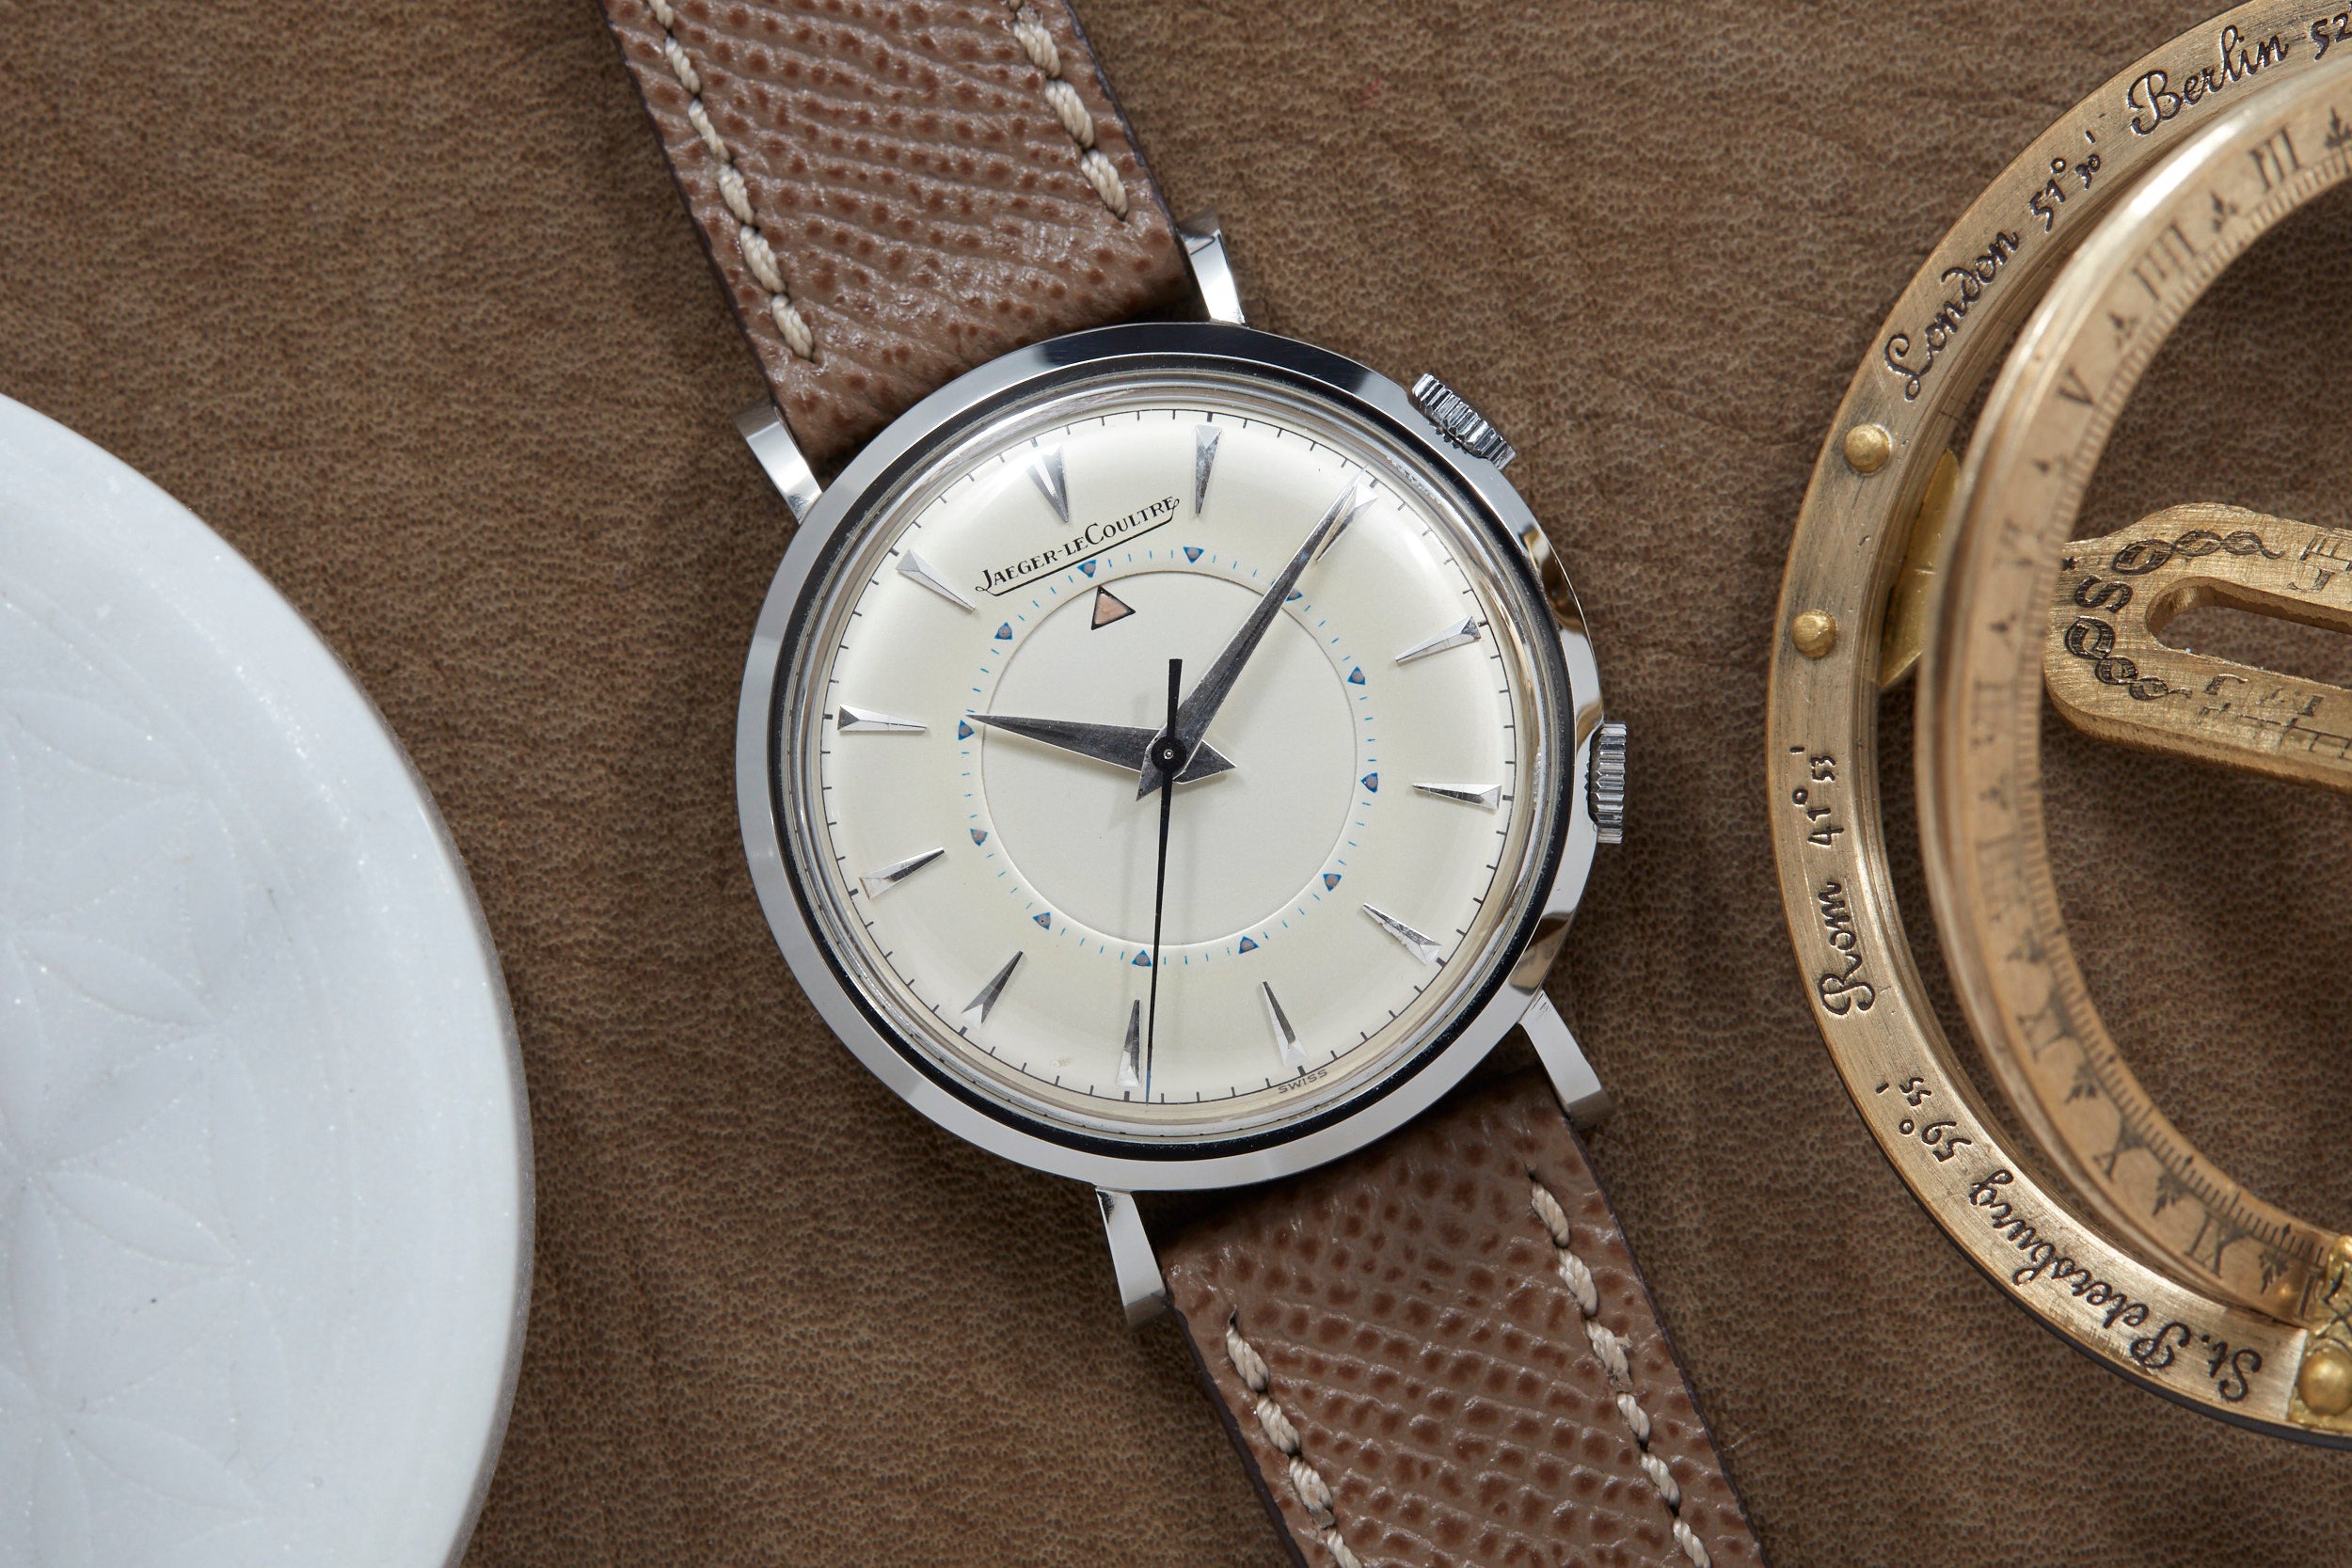 Jaeger Le Coultre Memovox Manual Wind